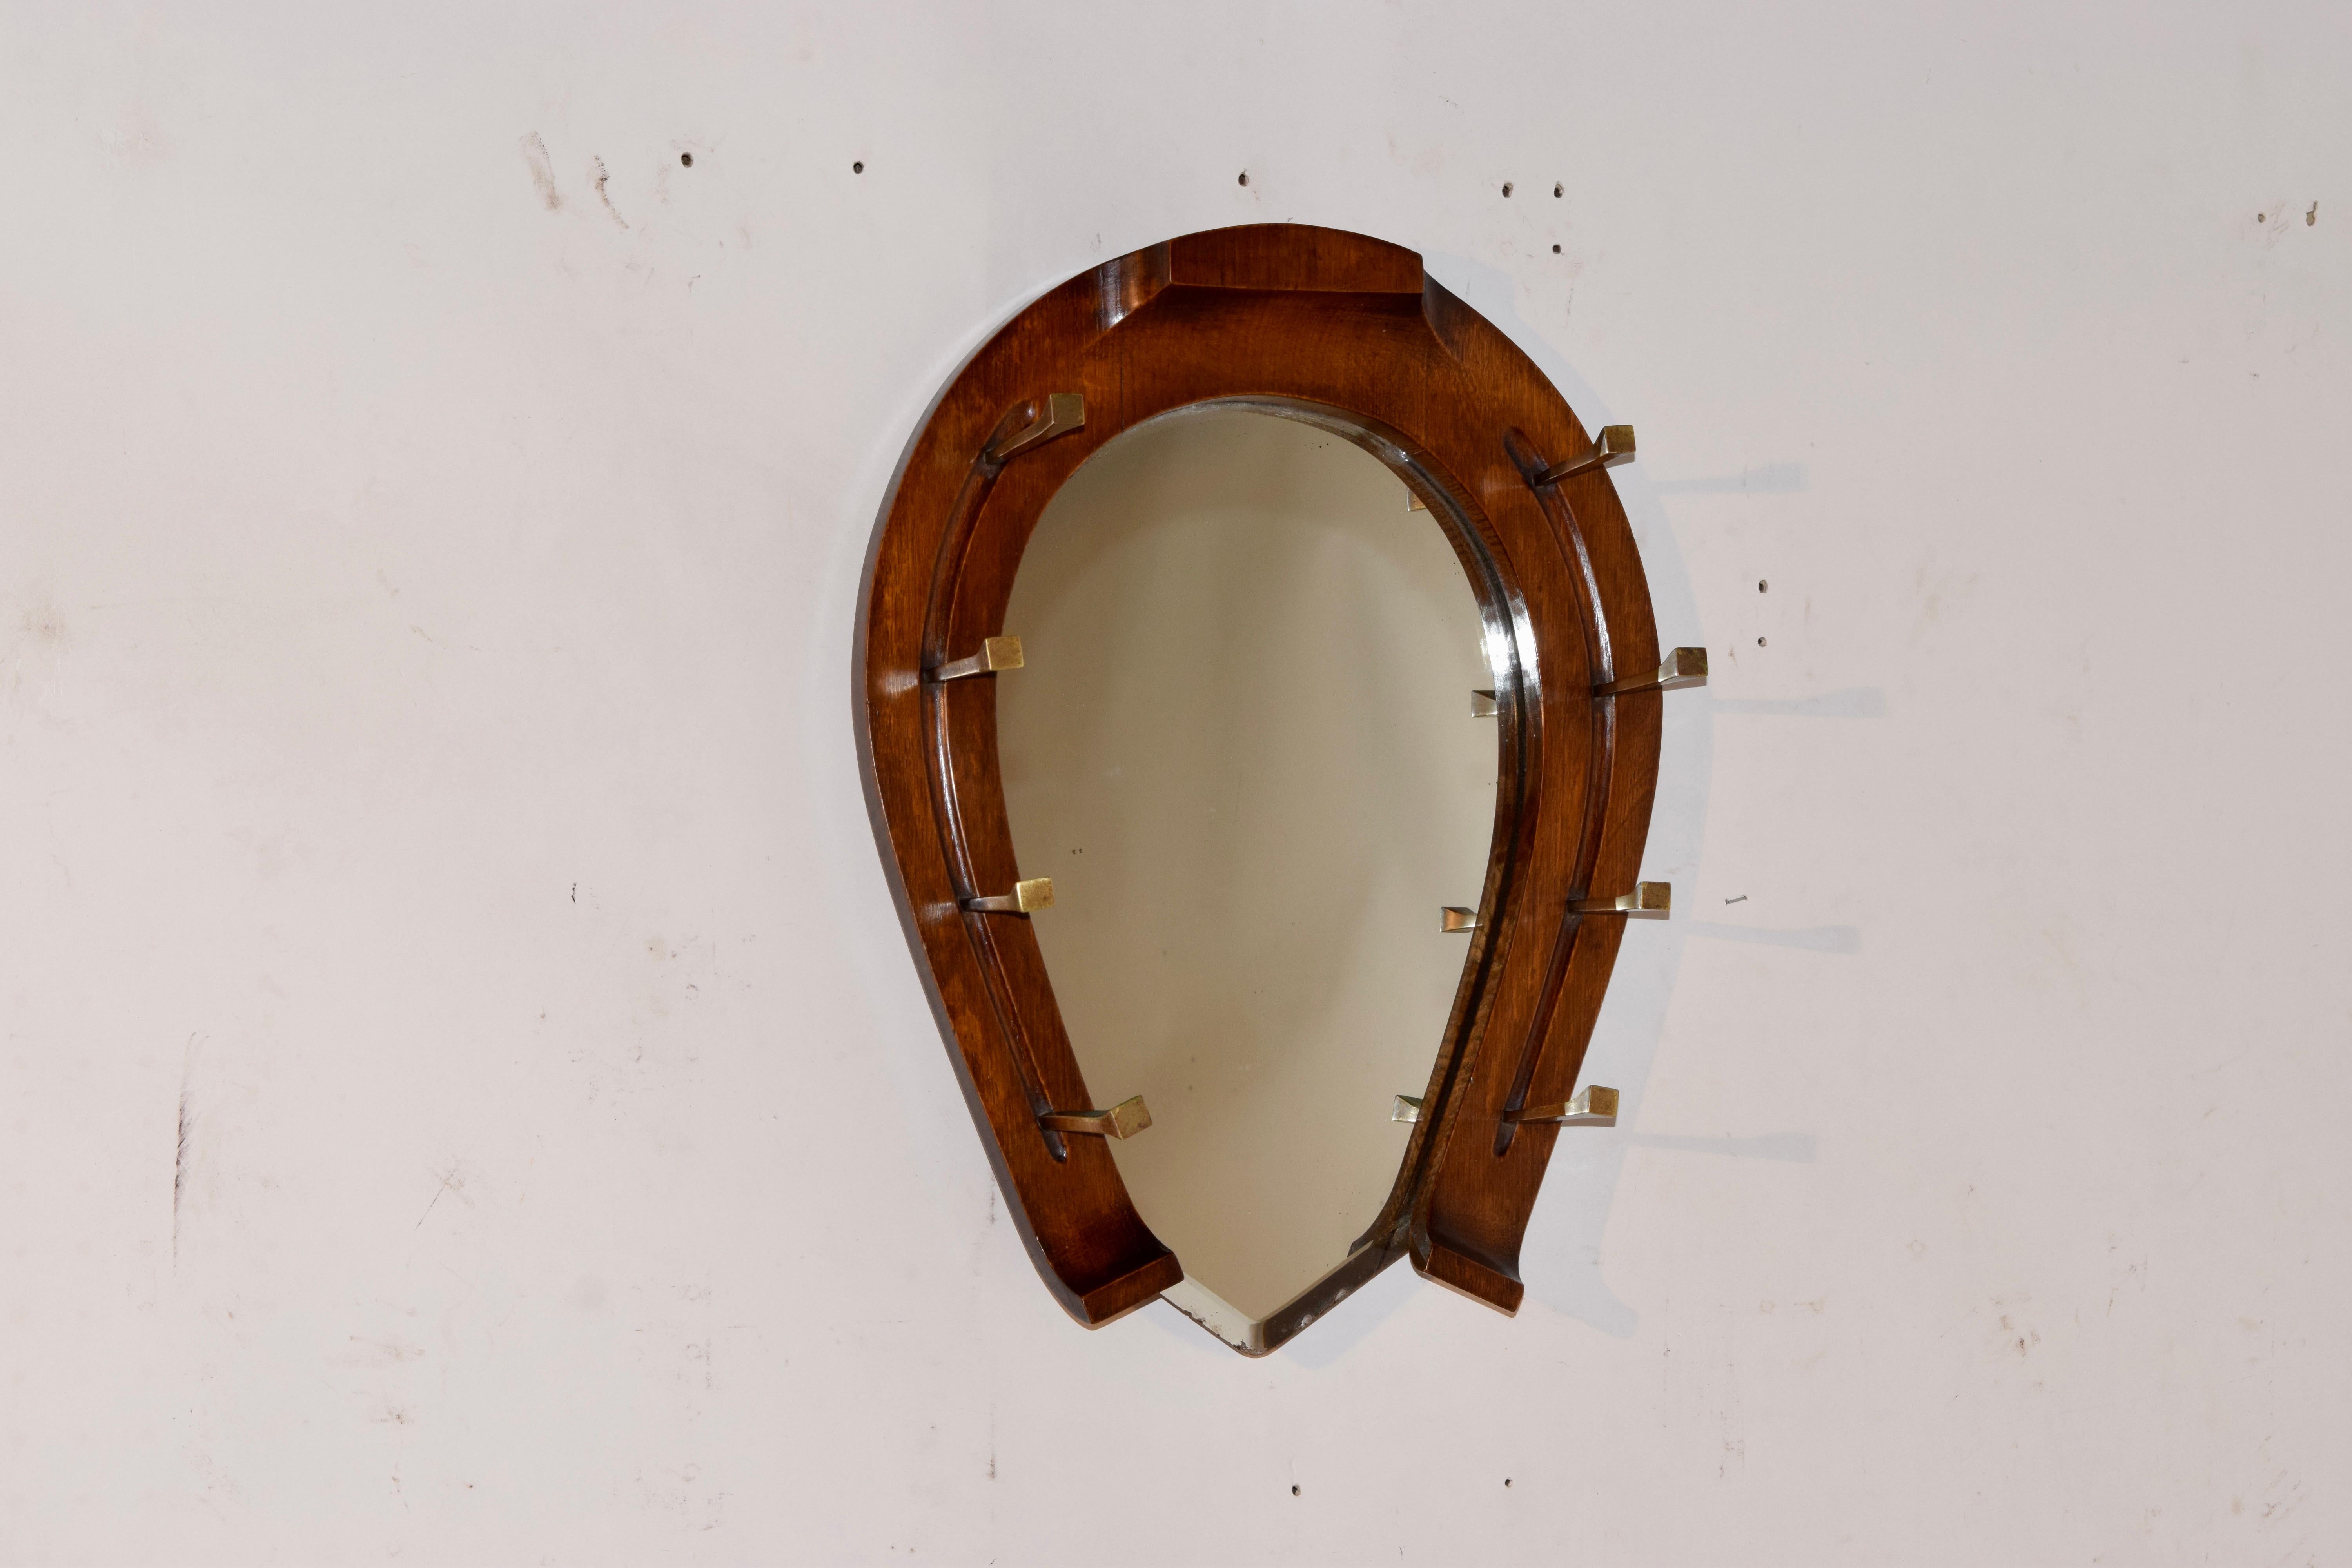 English oak mirror in the shape of a horseshoe with hand cast brass hat racks in the shape of horseshoe nails. There is a brass registration mark on the top of the horseshoe dating the manufacture of the piece to May 11, 1878. The mirror is original